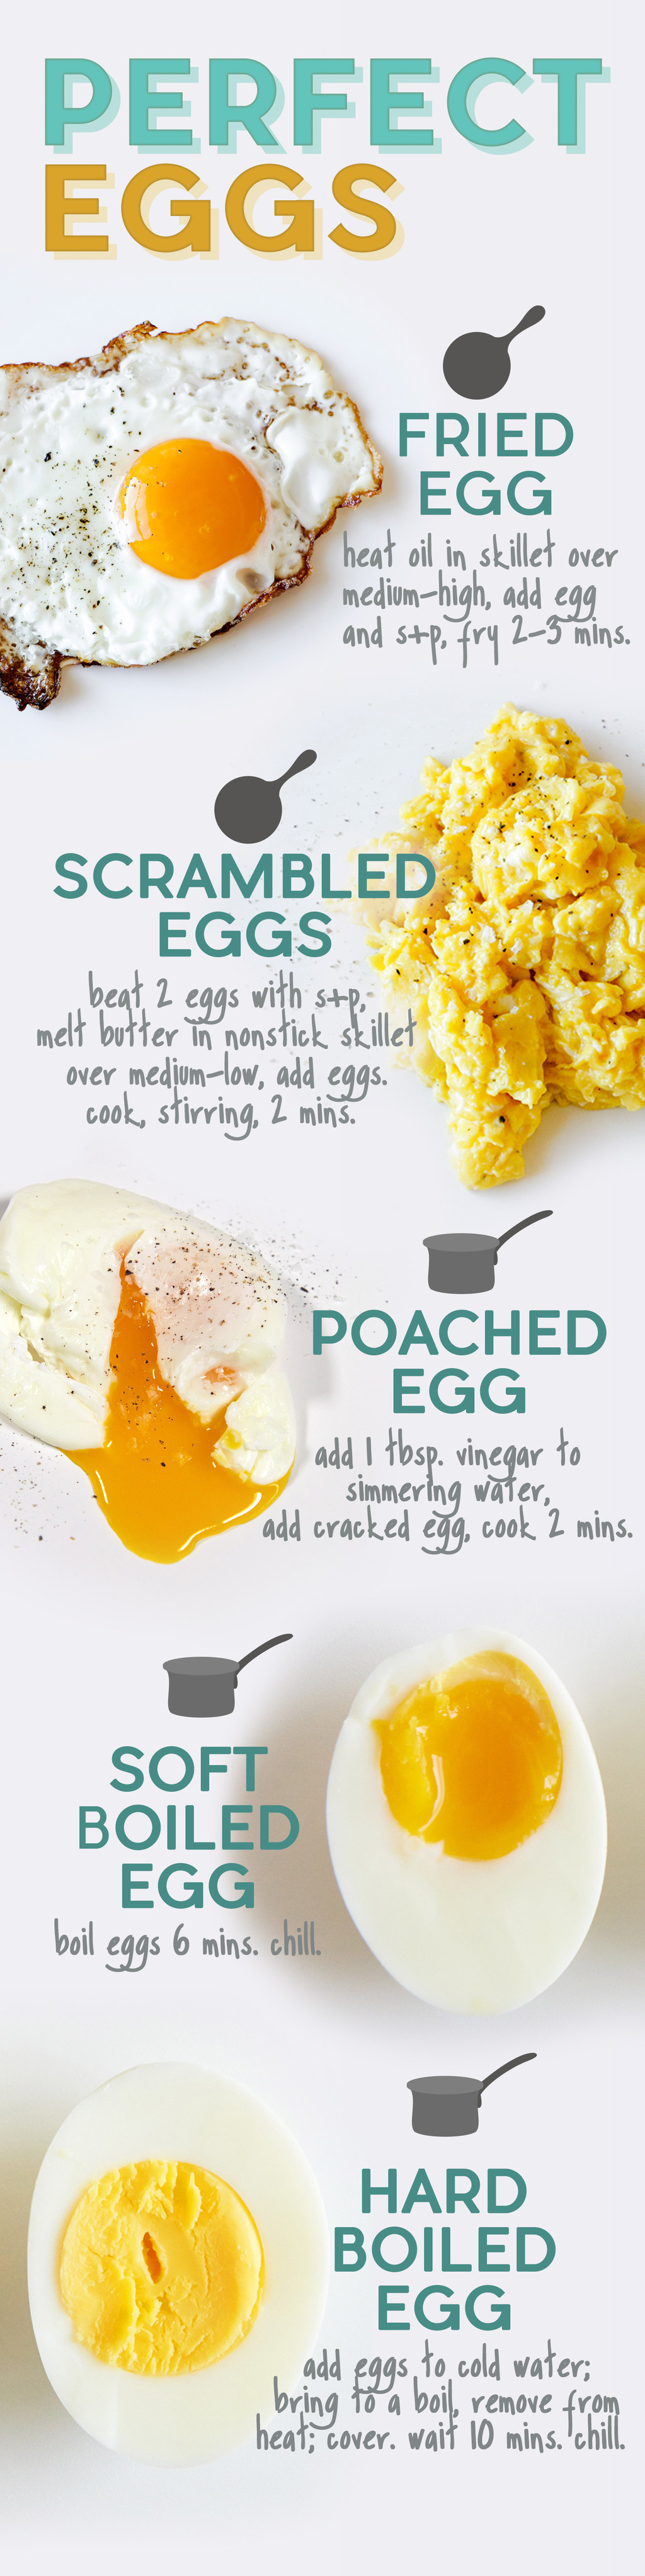 How to get perfectly cooked eggs every time